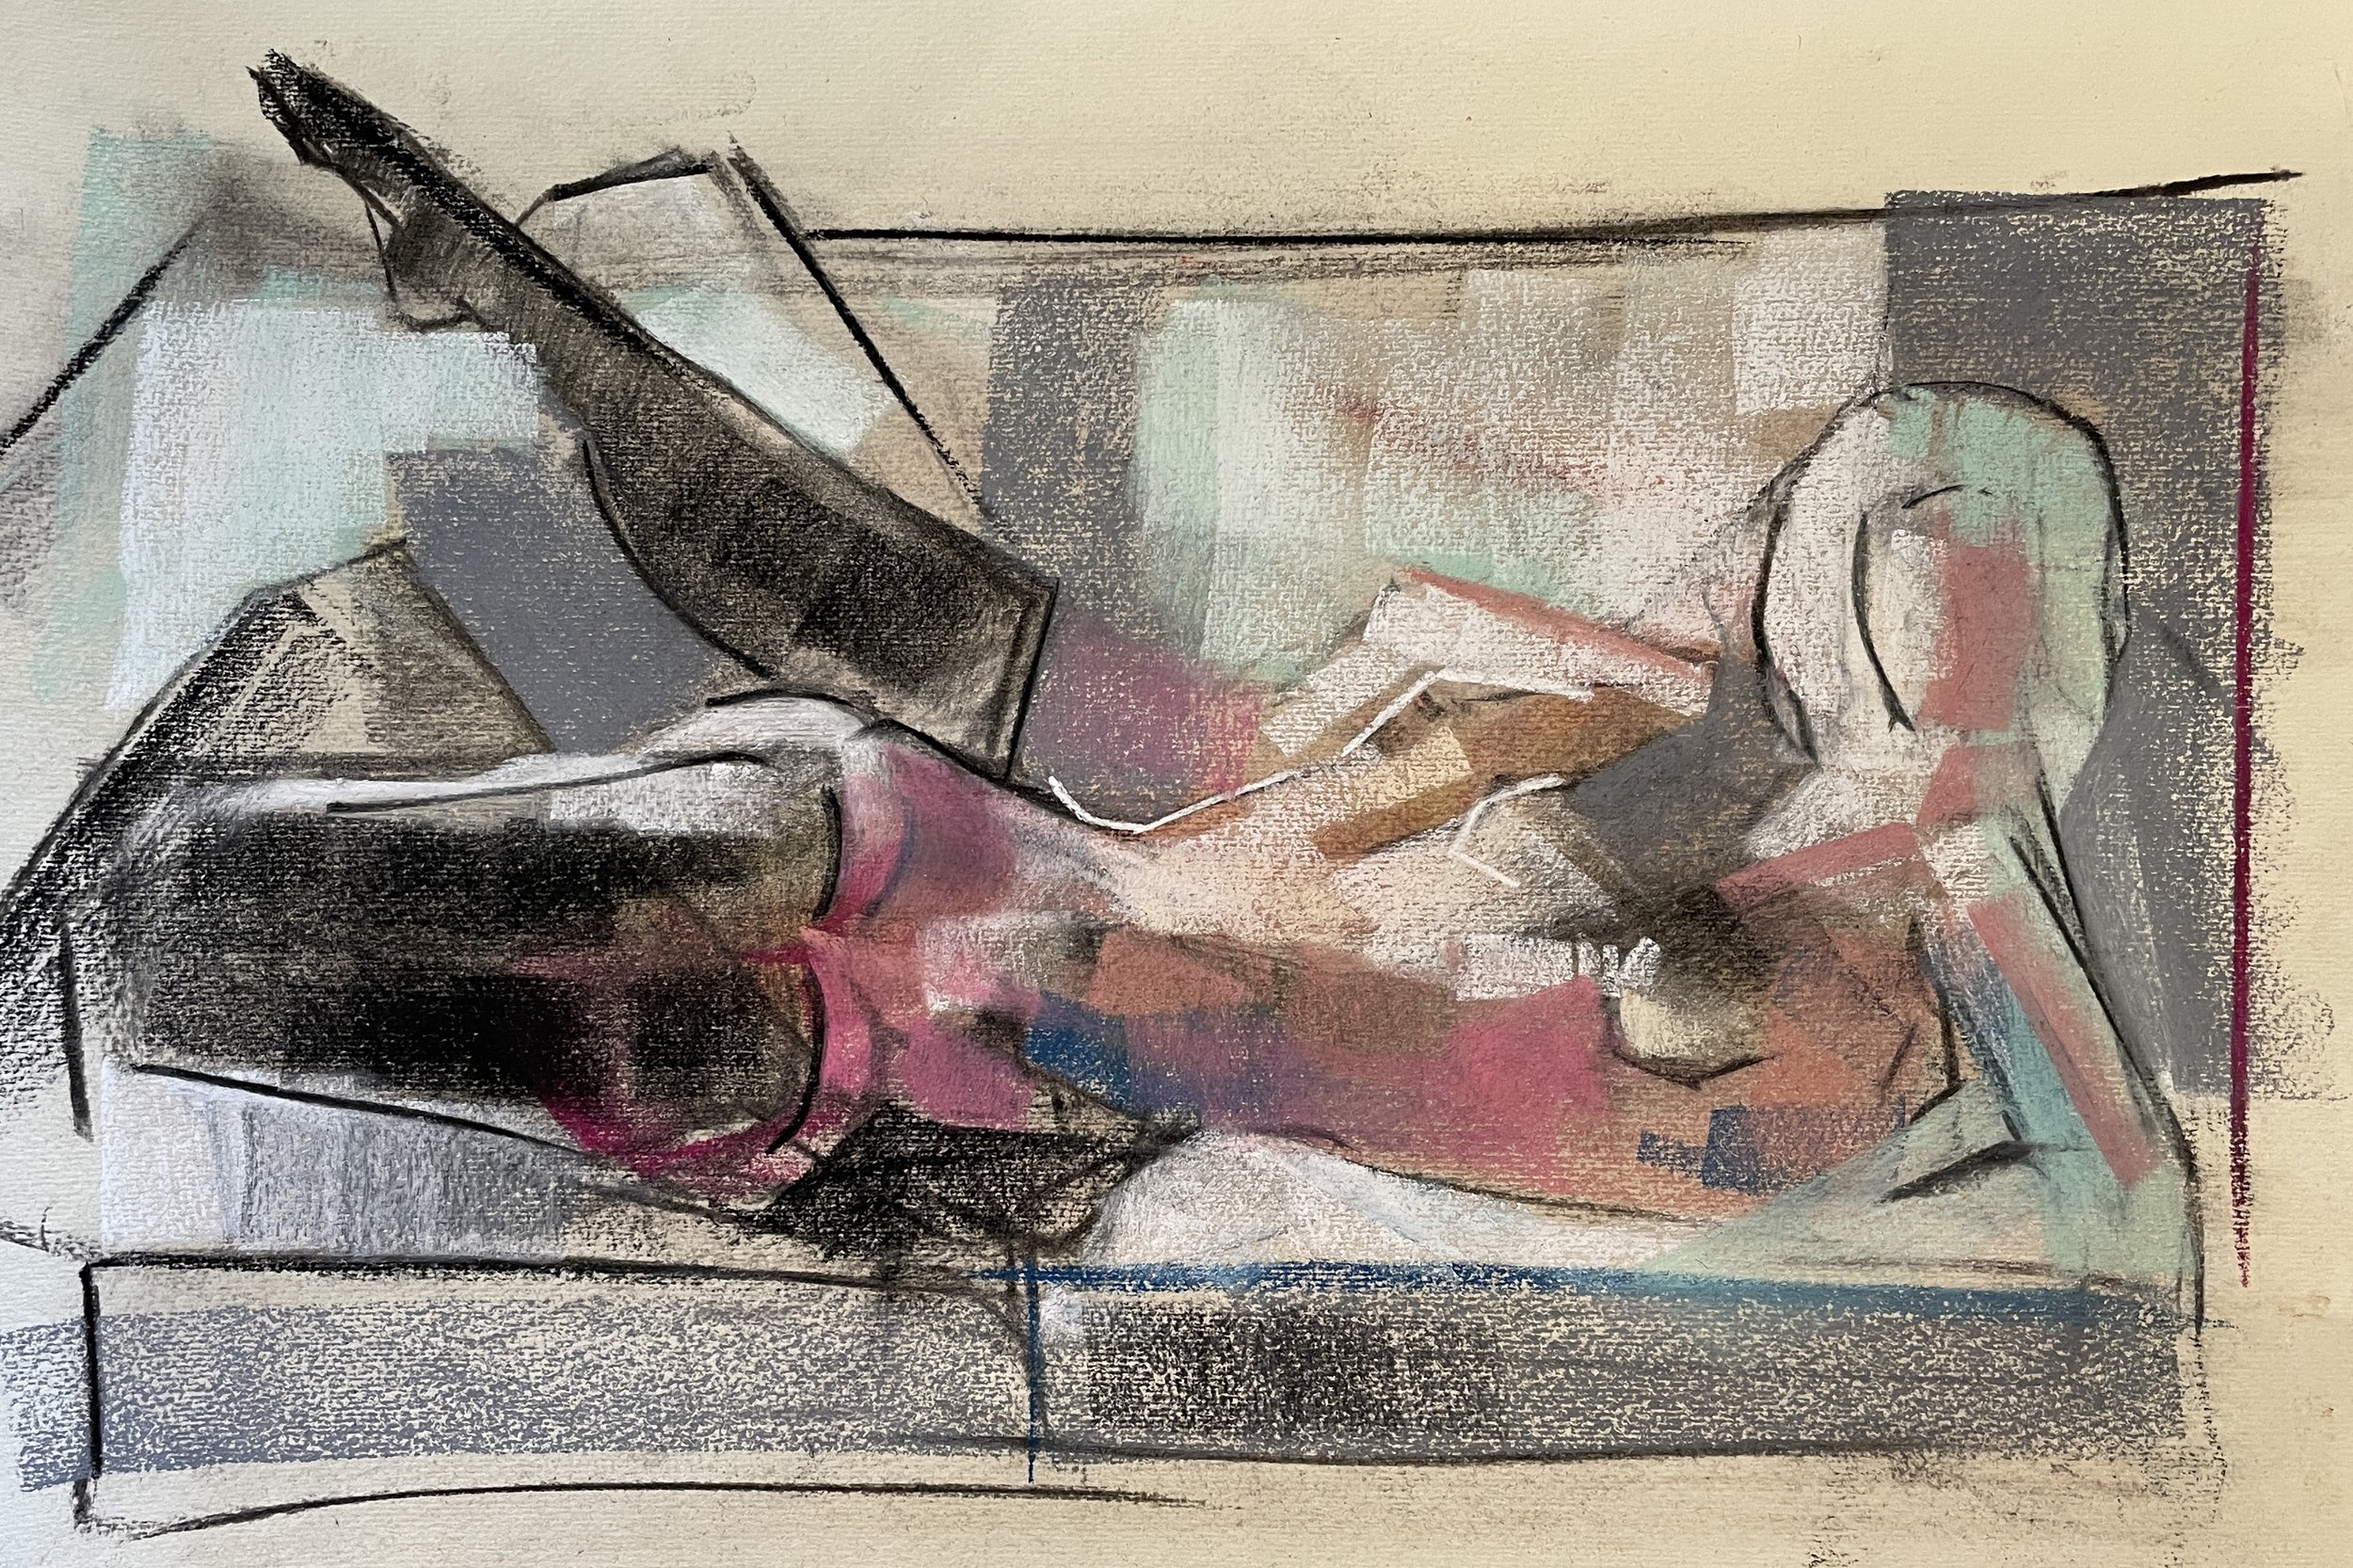 T.C. Sofa Stockings, Pastel, 22 by 15 inches, 2022.